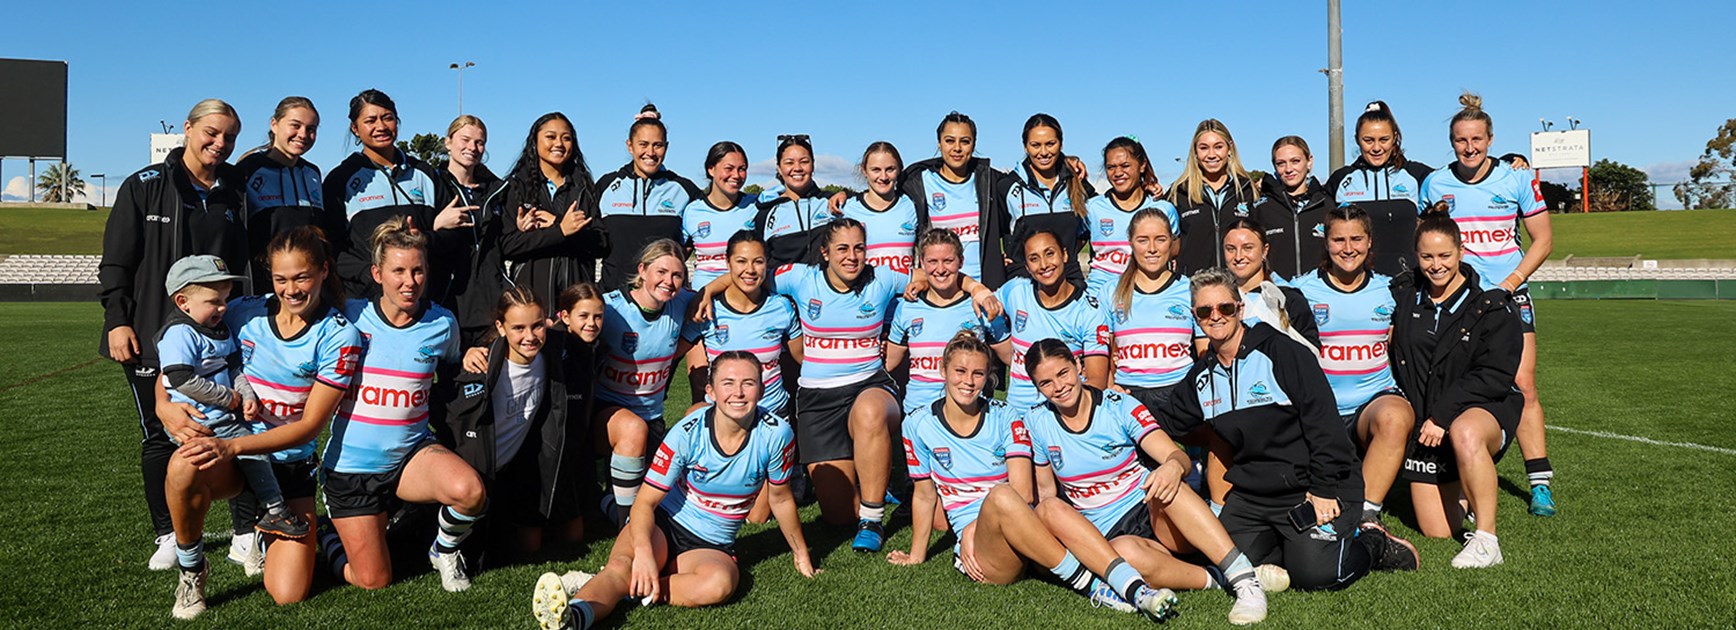 HNWP Sharks win their way into Grand Final